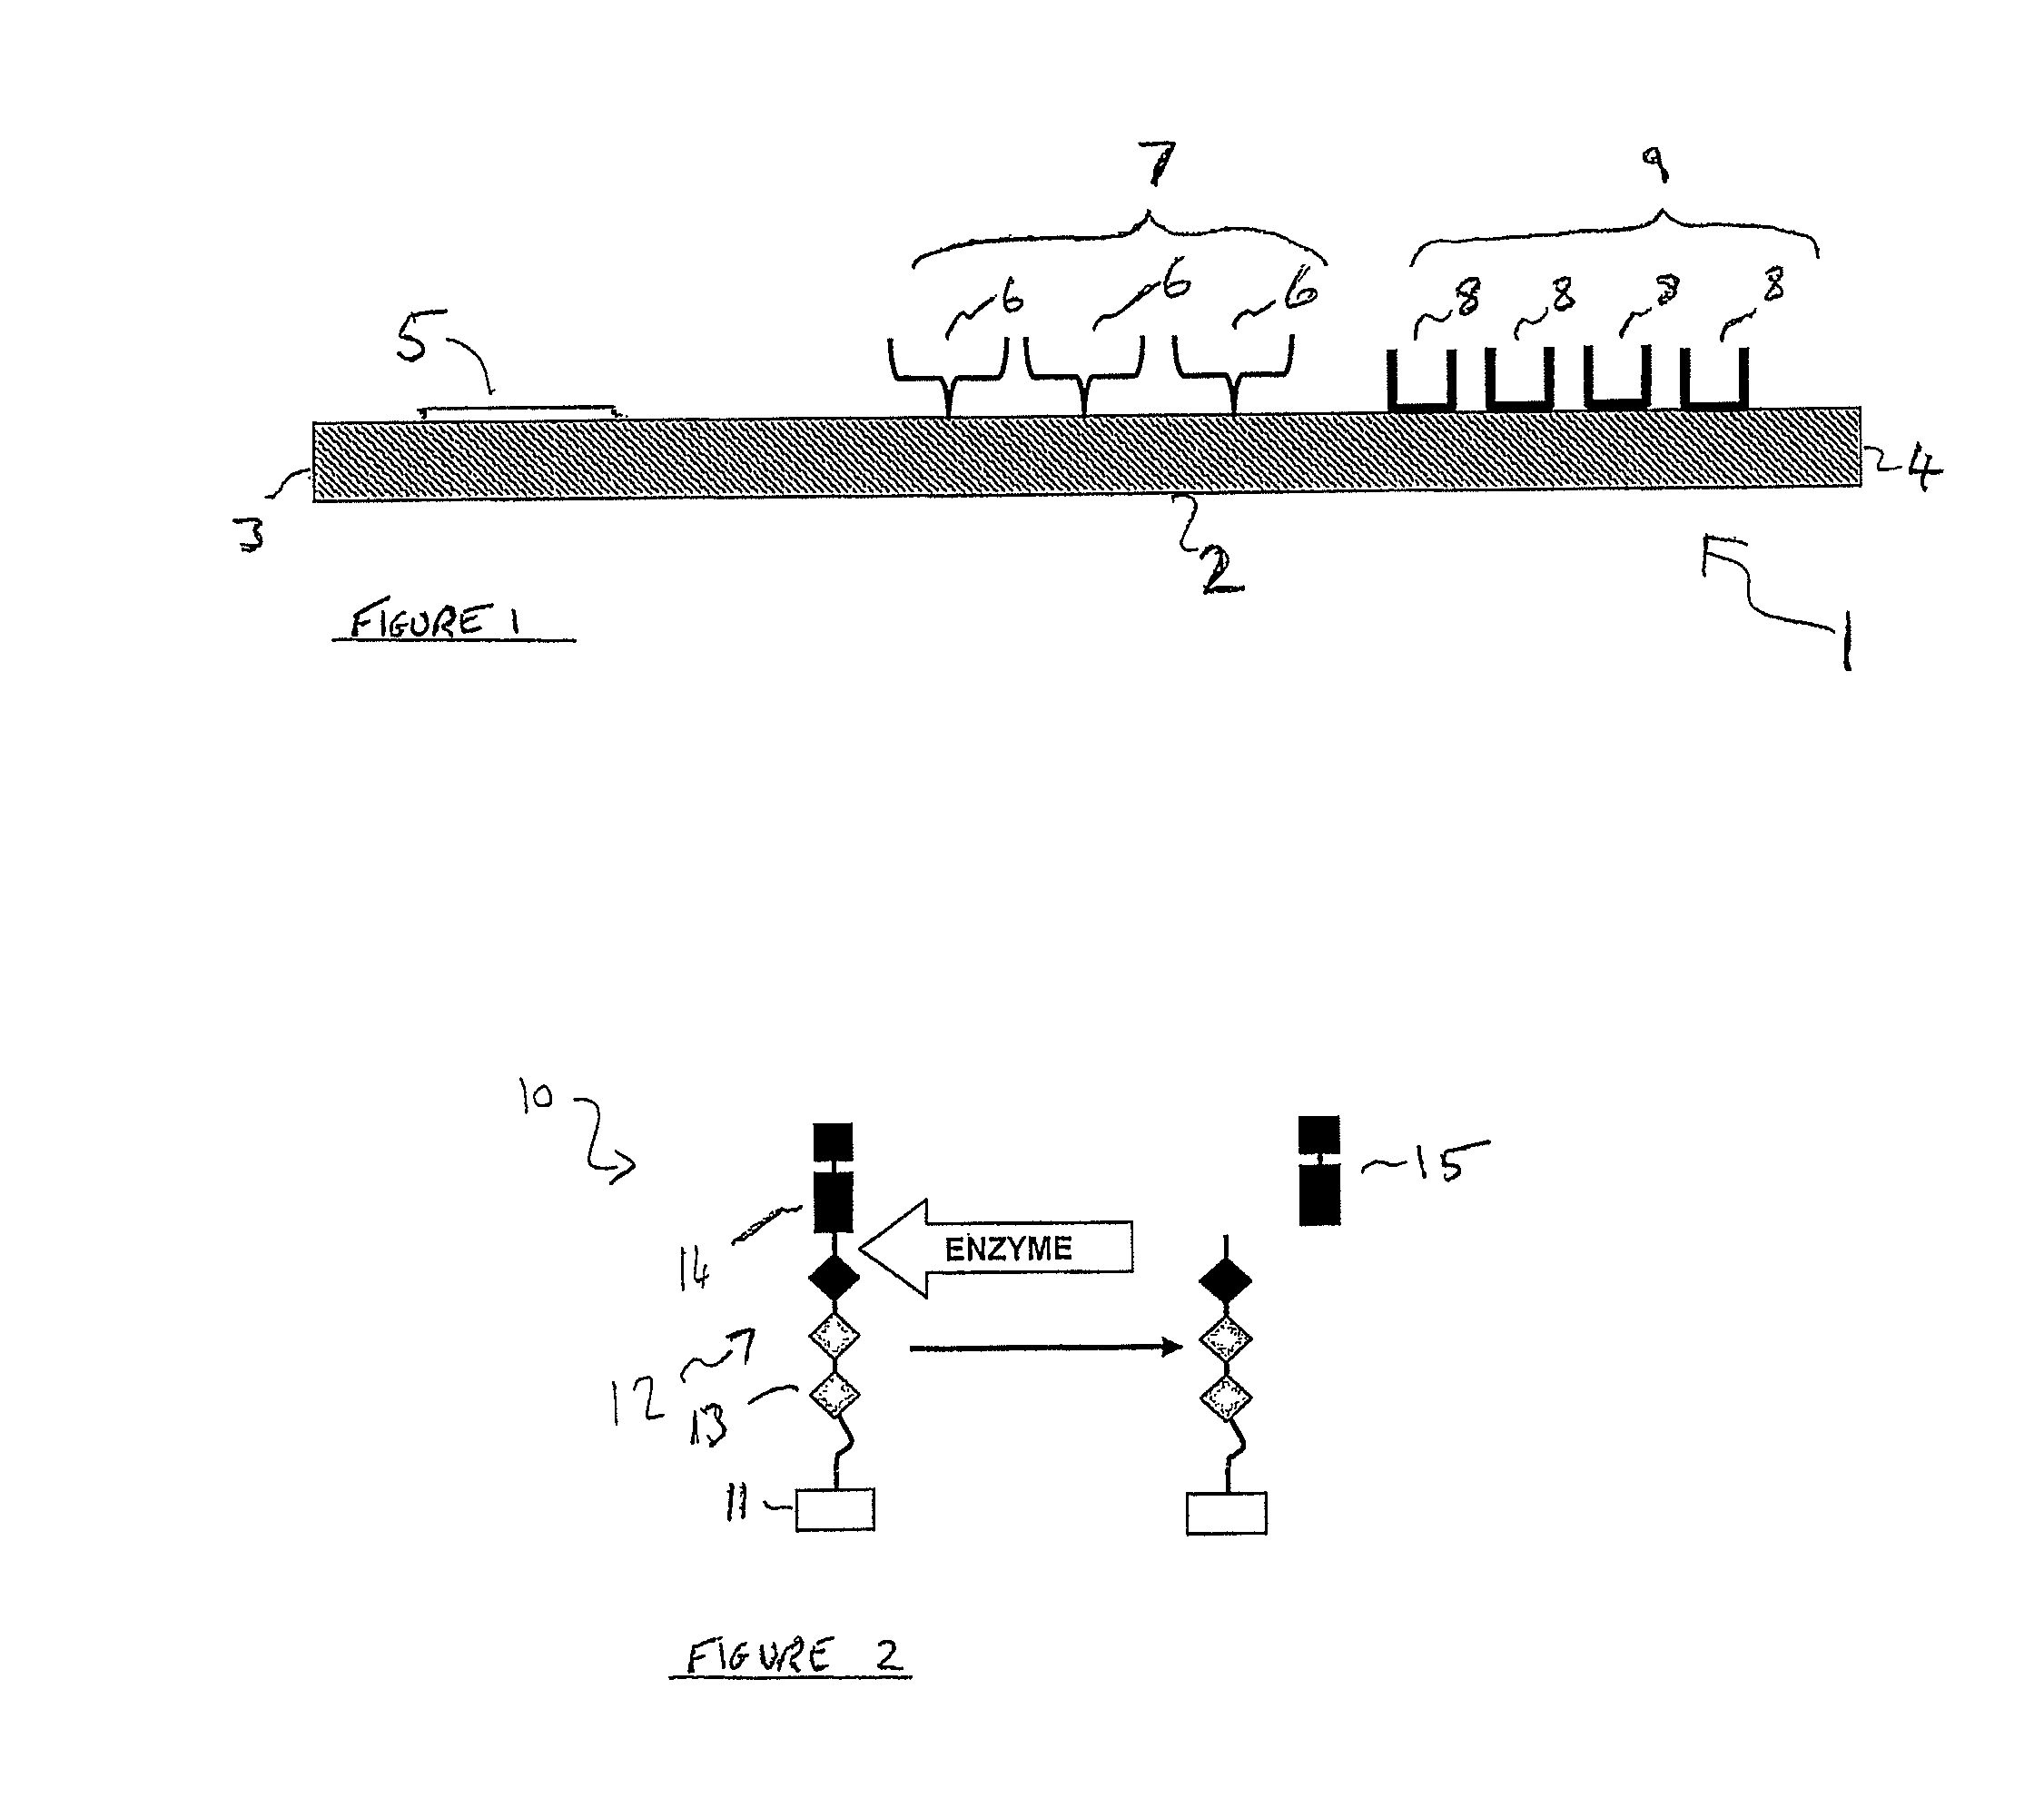 Enzyme detection device